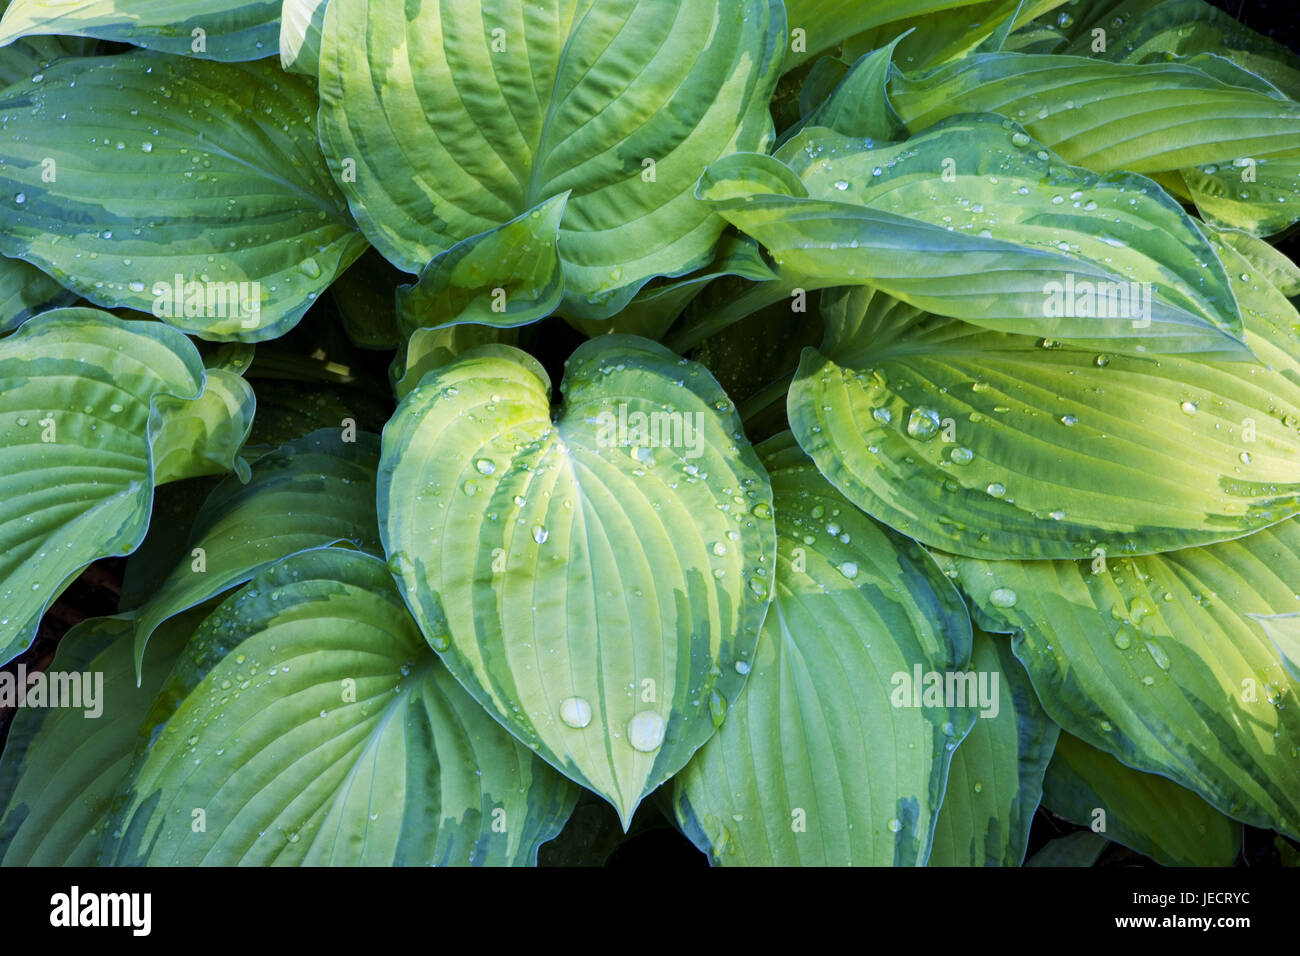 Glockenfunkie, Hostia ventricosa, leaves, drops of water, plants, flowers, cultivated plant, ornamental plant, Funkie, drop, dewdrop, freshness, nature, wet, green, medium close-up, Stock Photo